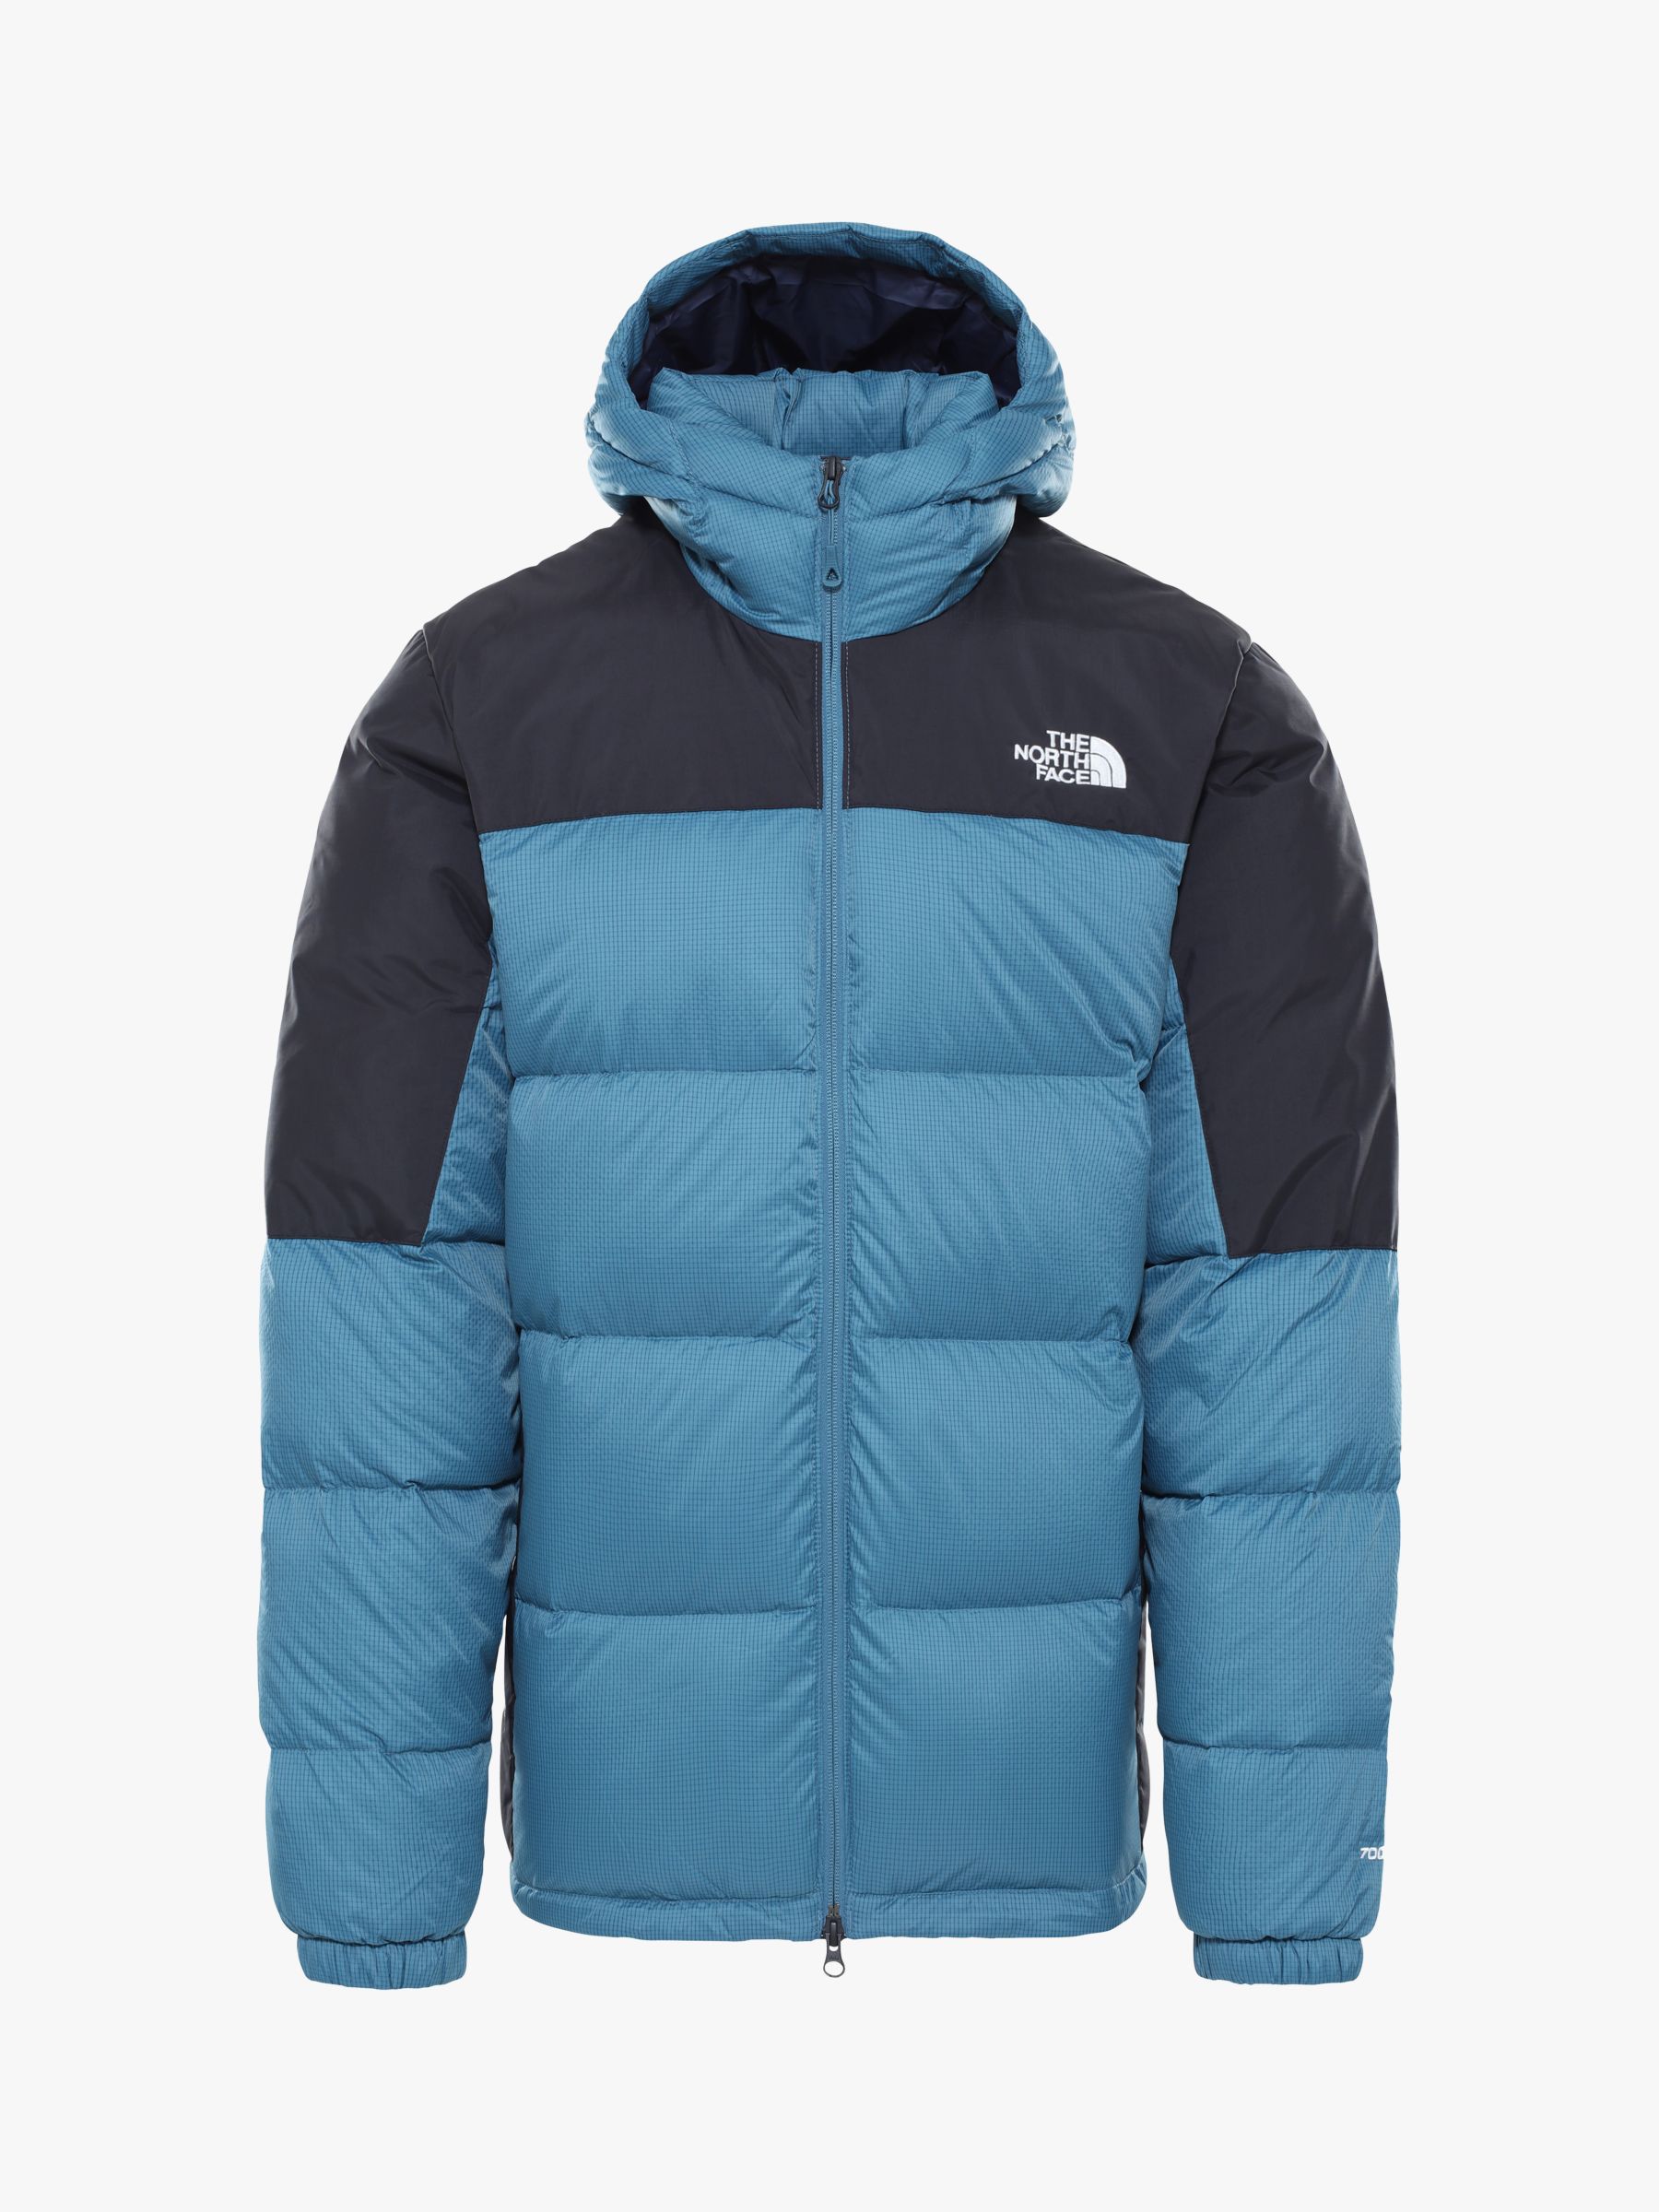 where can i buy north face coats